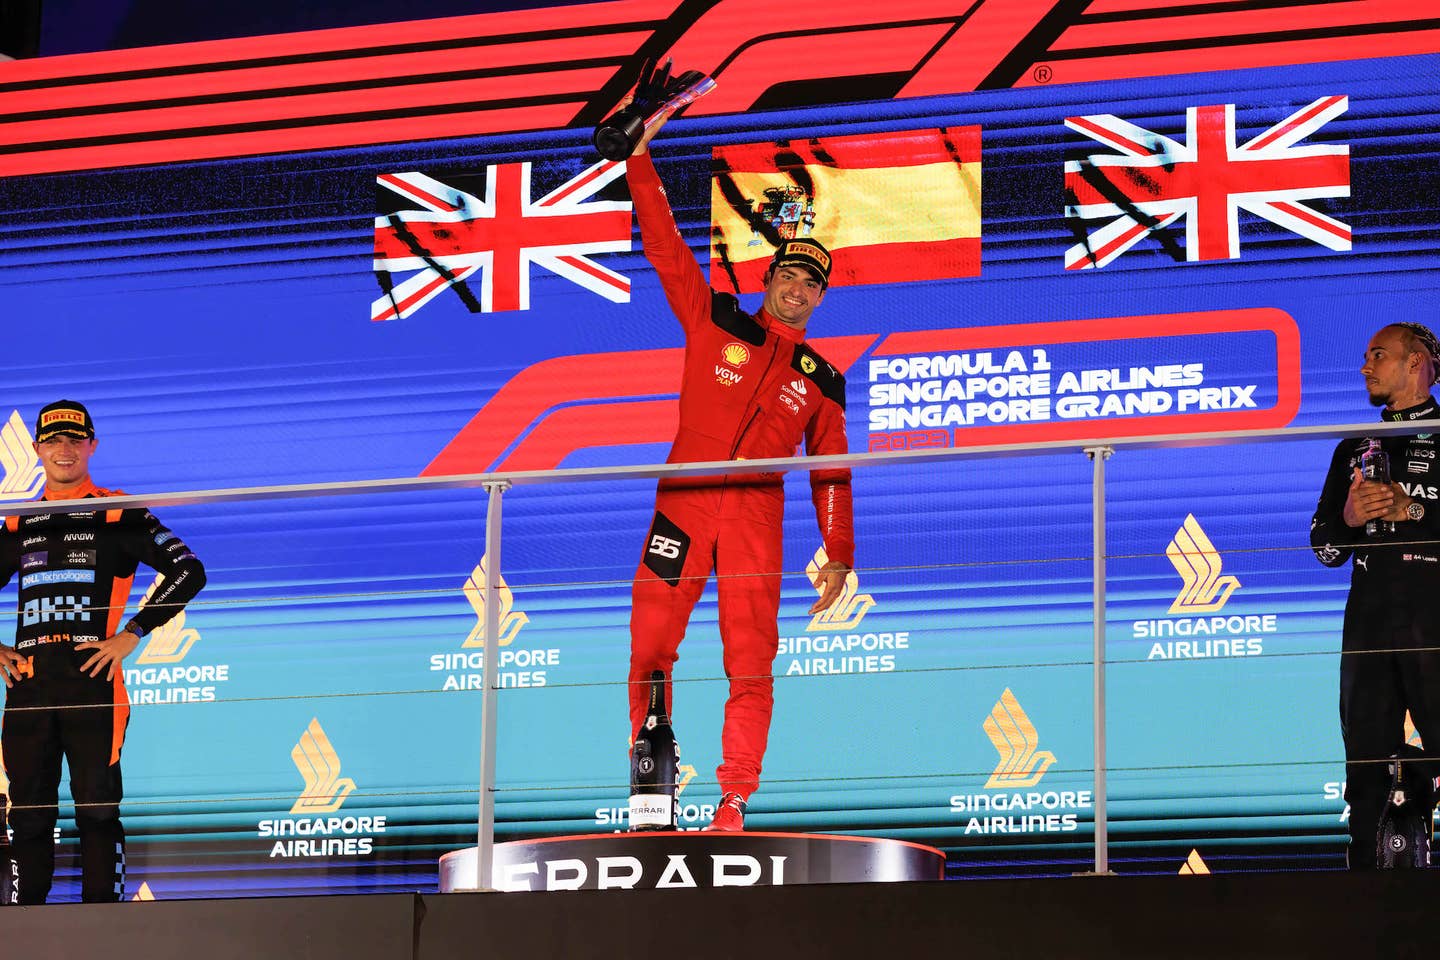 Singapore Formula 1 Grand Prix winner Carlos Sainz lifts his trophy on the top step of the podium.